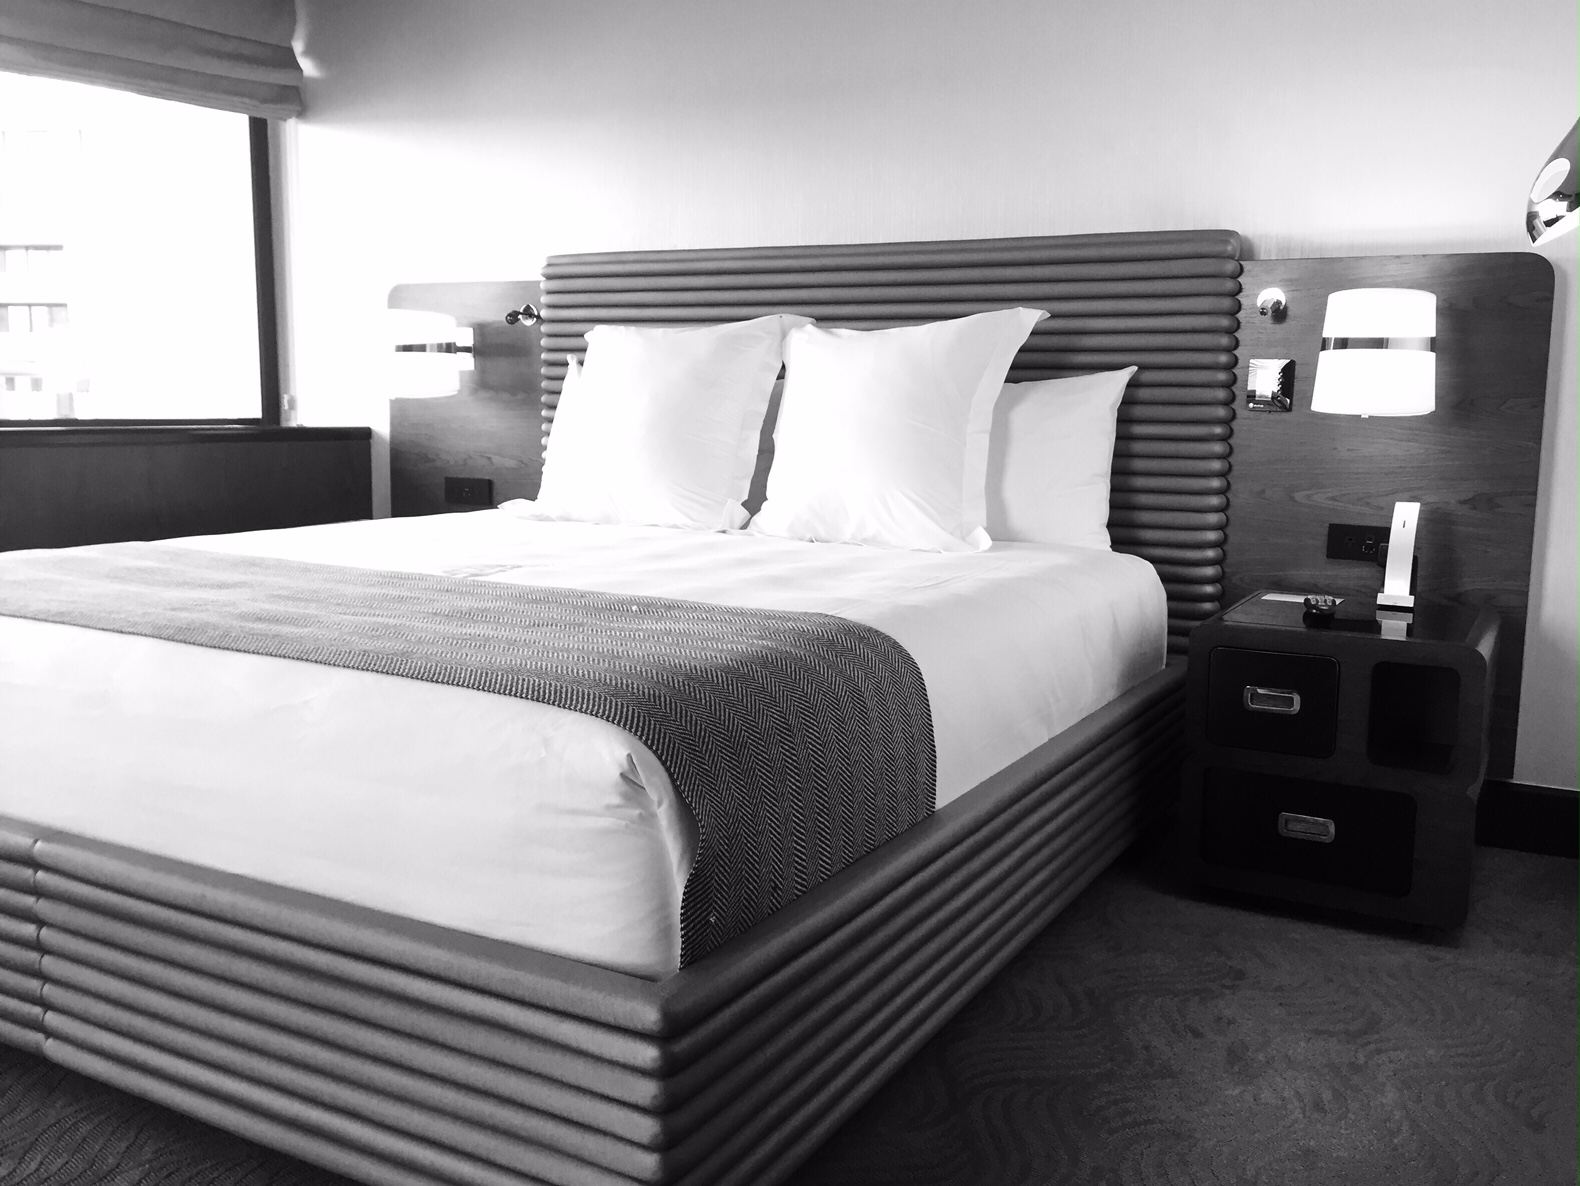 Plush bedding and extraordinary views are part of the newly-renovated Watergate experience. (WTOP/Neal Augenstein)